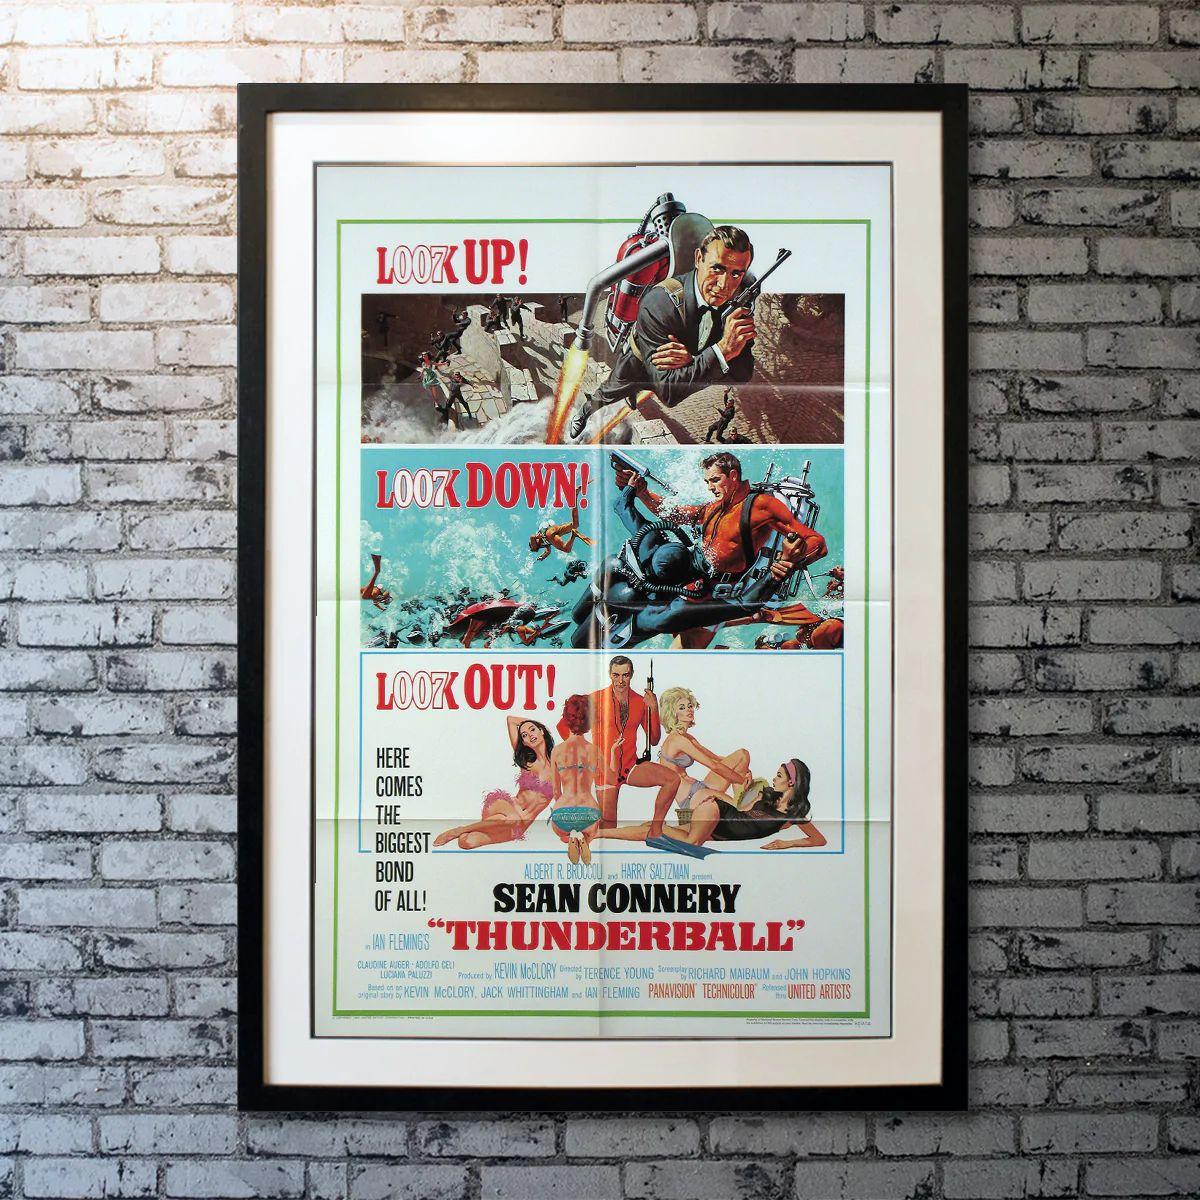 Thunderball, Unframed Poster, 1965

Original US One Sheet (27 x 41 inches). James Bond heads to the Bahamas to recover two nuclear warheads stolen by S.P.E.C.T.R.E. Agent Emilio Largo in an international extortion scheme. This is the edition of